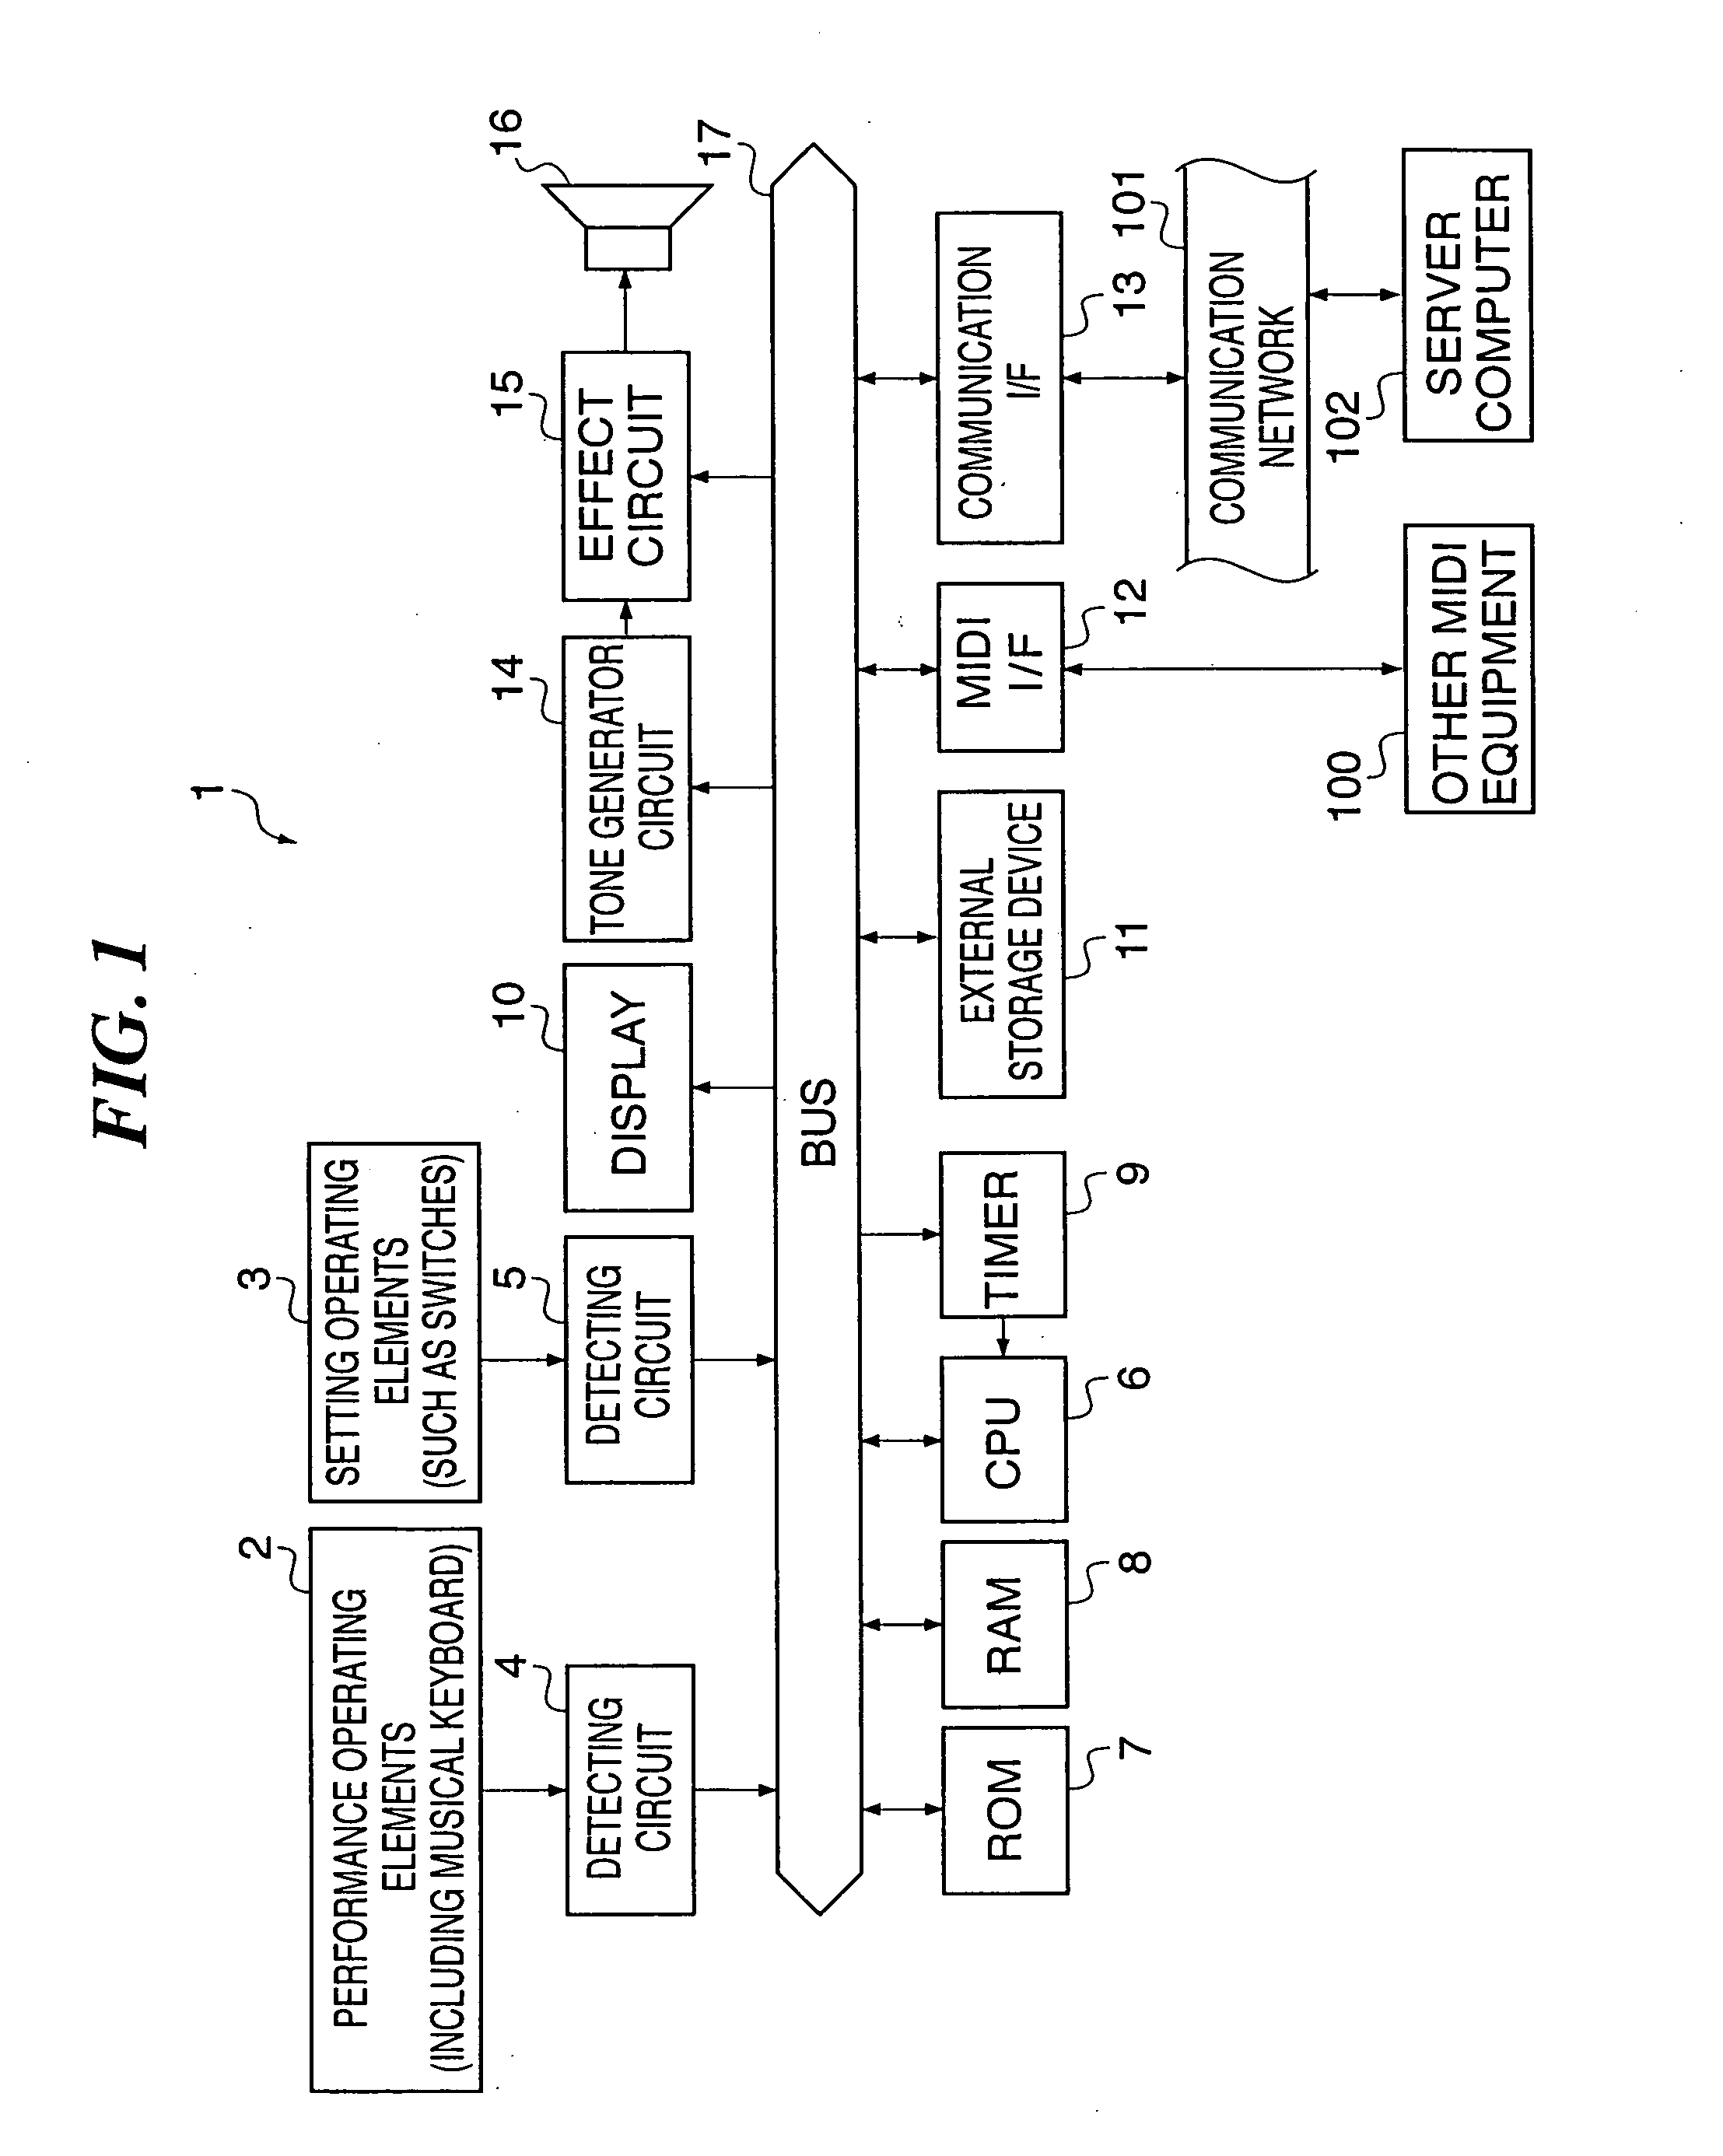 Automatic performance data reproducing apparatus, control method therefor, and program for implementing the control method